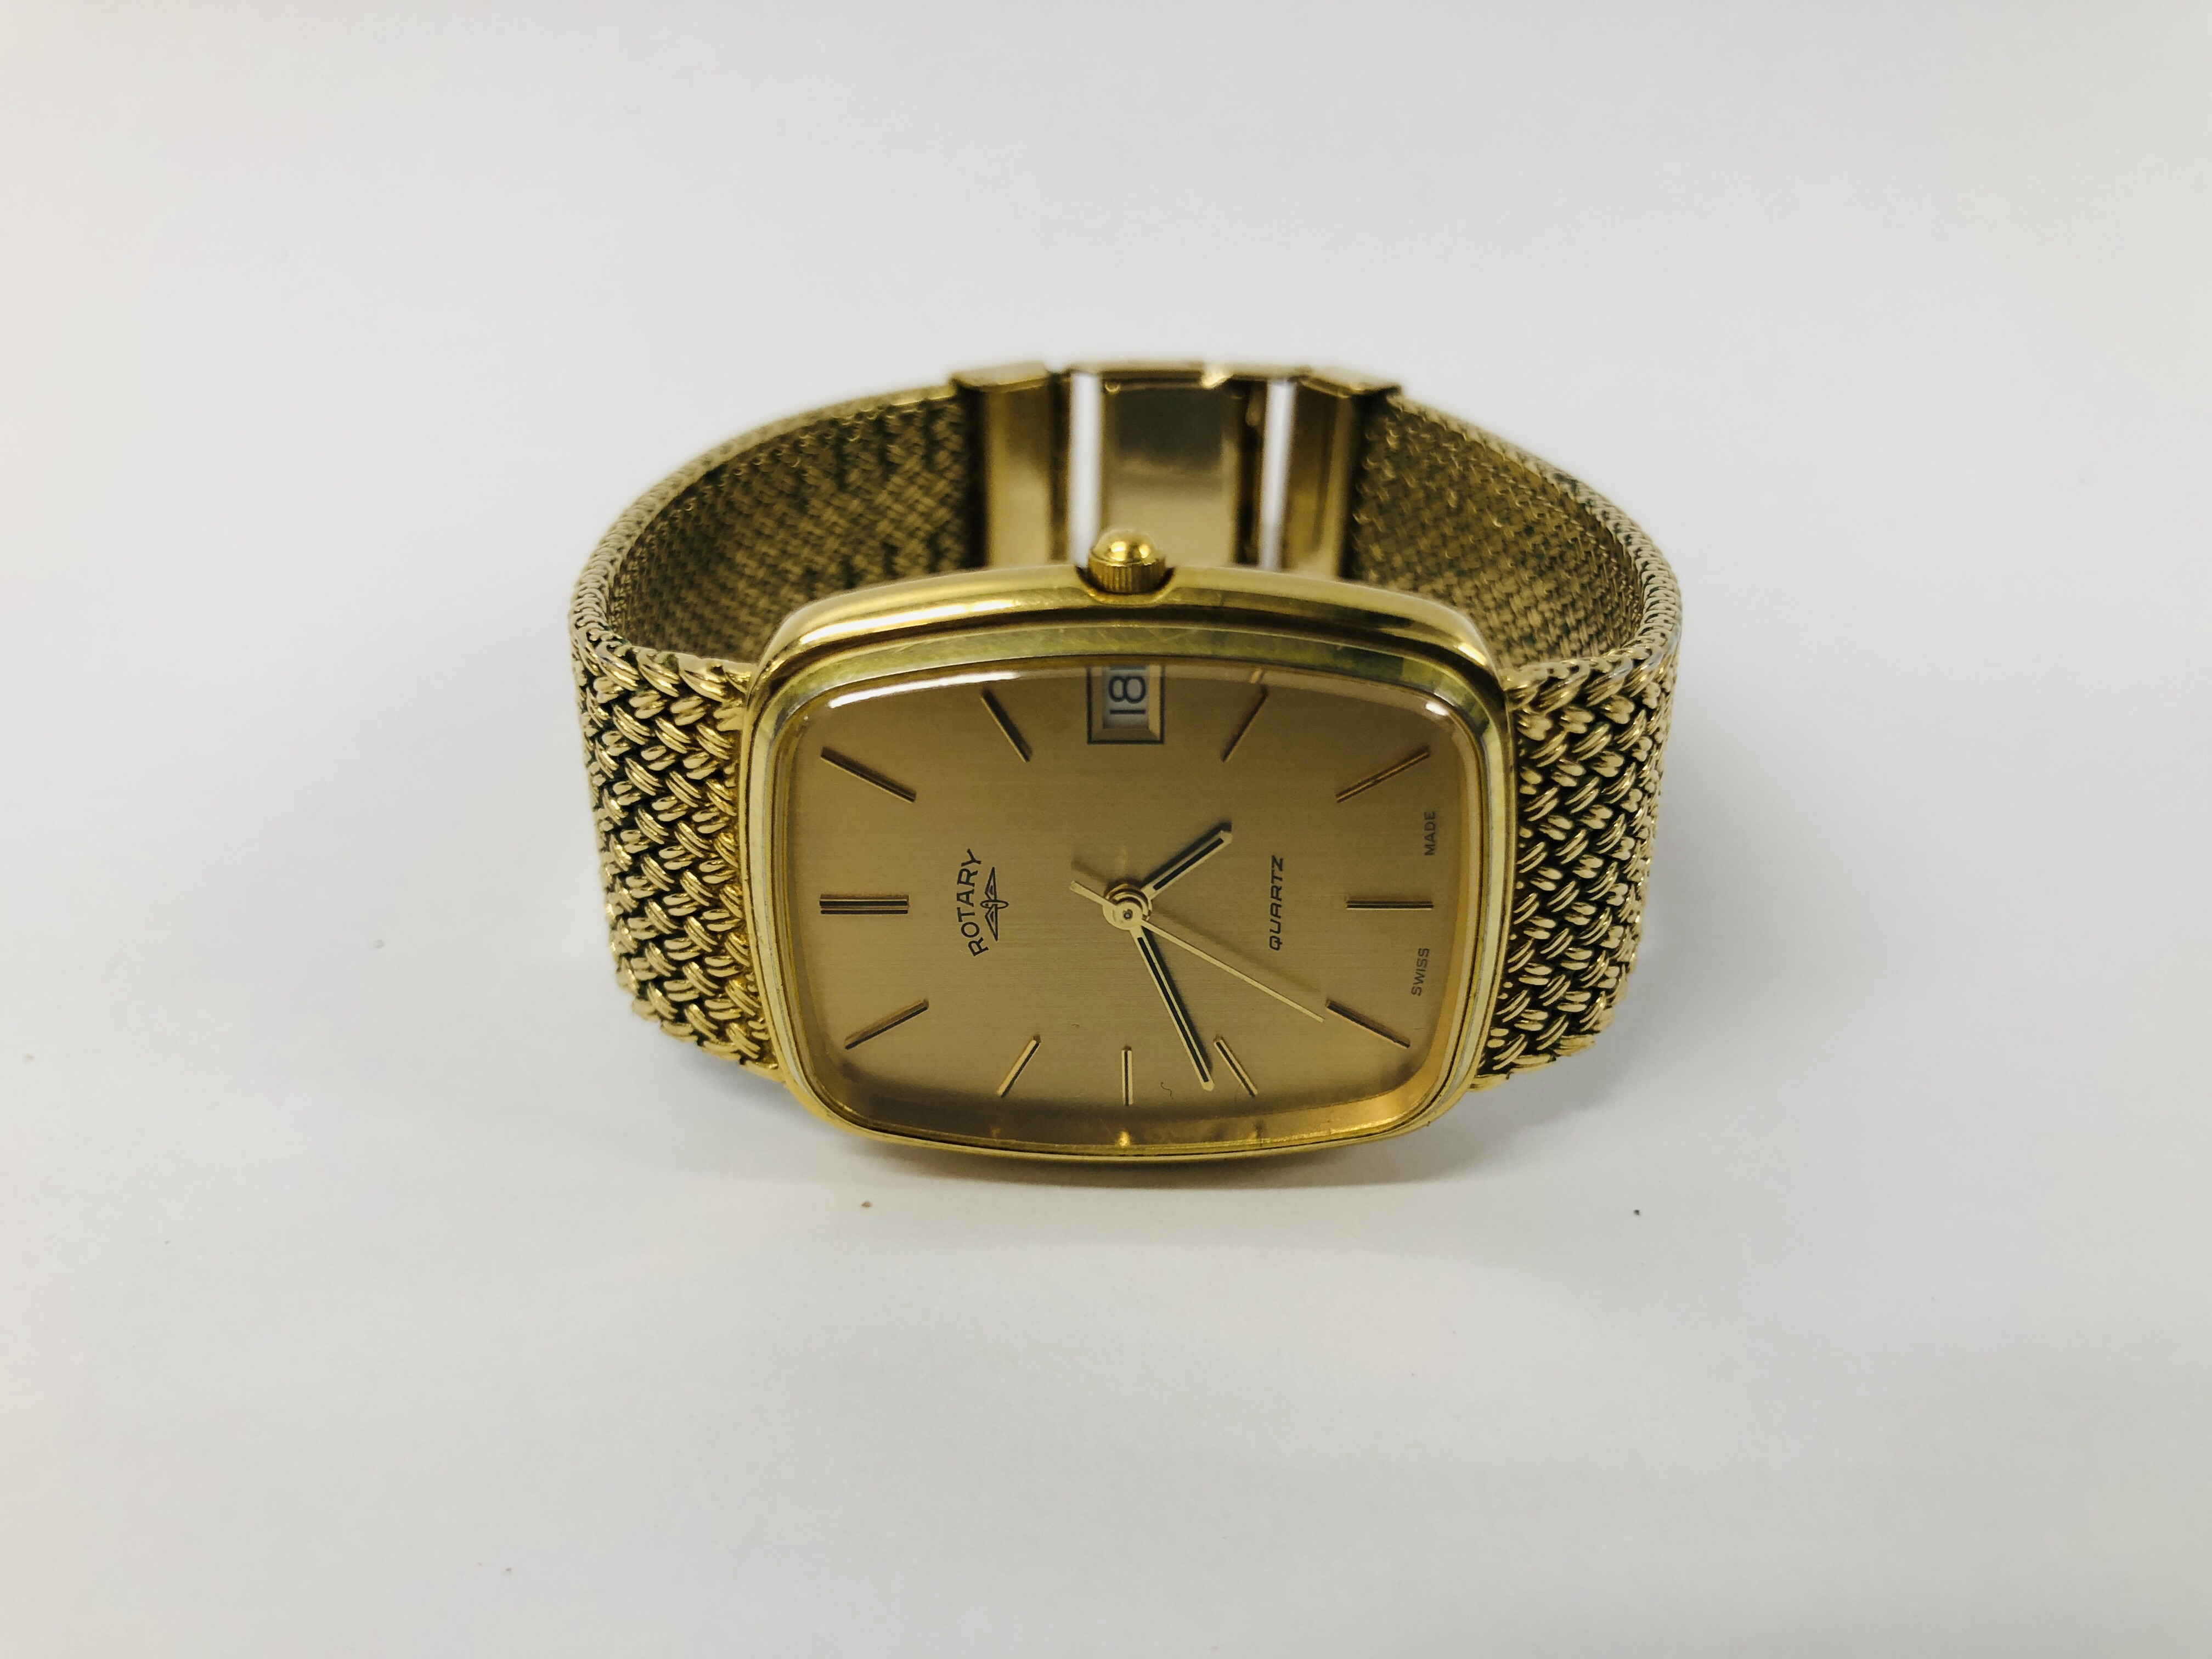 A GENTLEMAN'S ROTARY WRIST WATCH ON GOLD PLATED BRAIDED BRACELET, QUARTZ MOVEMENT. - Image 7 of 7